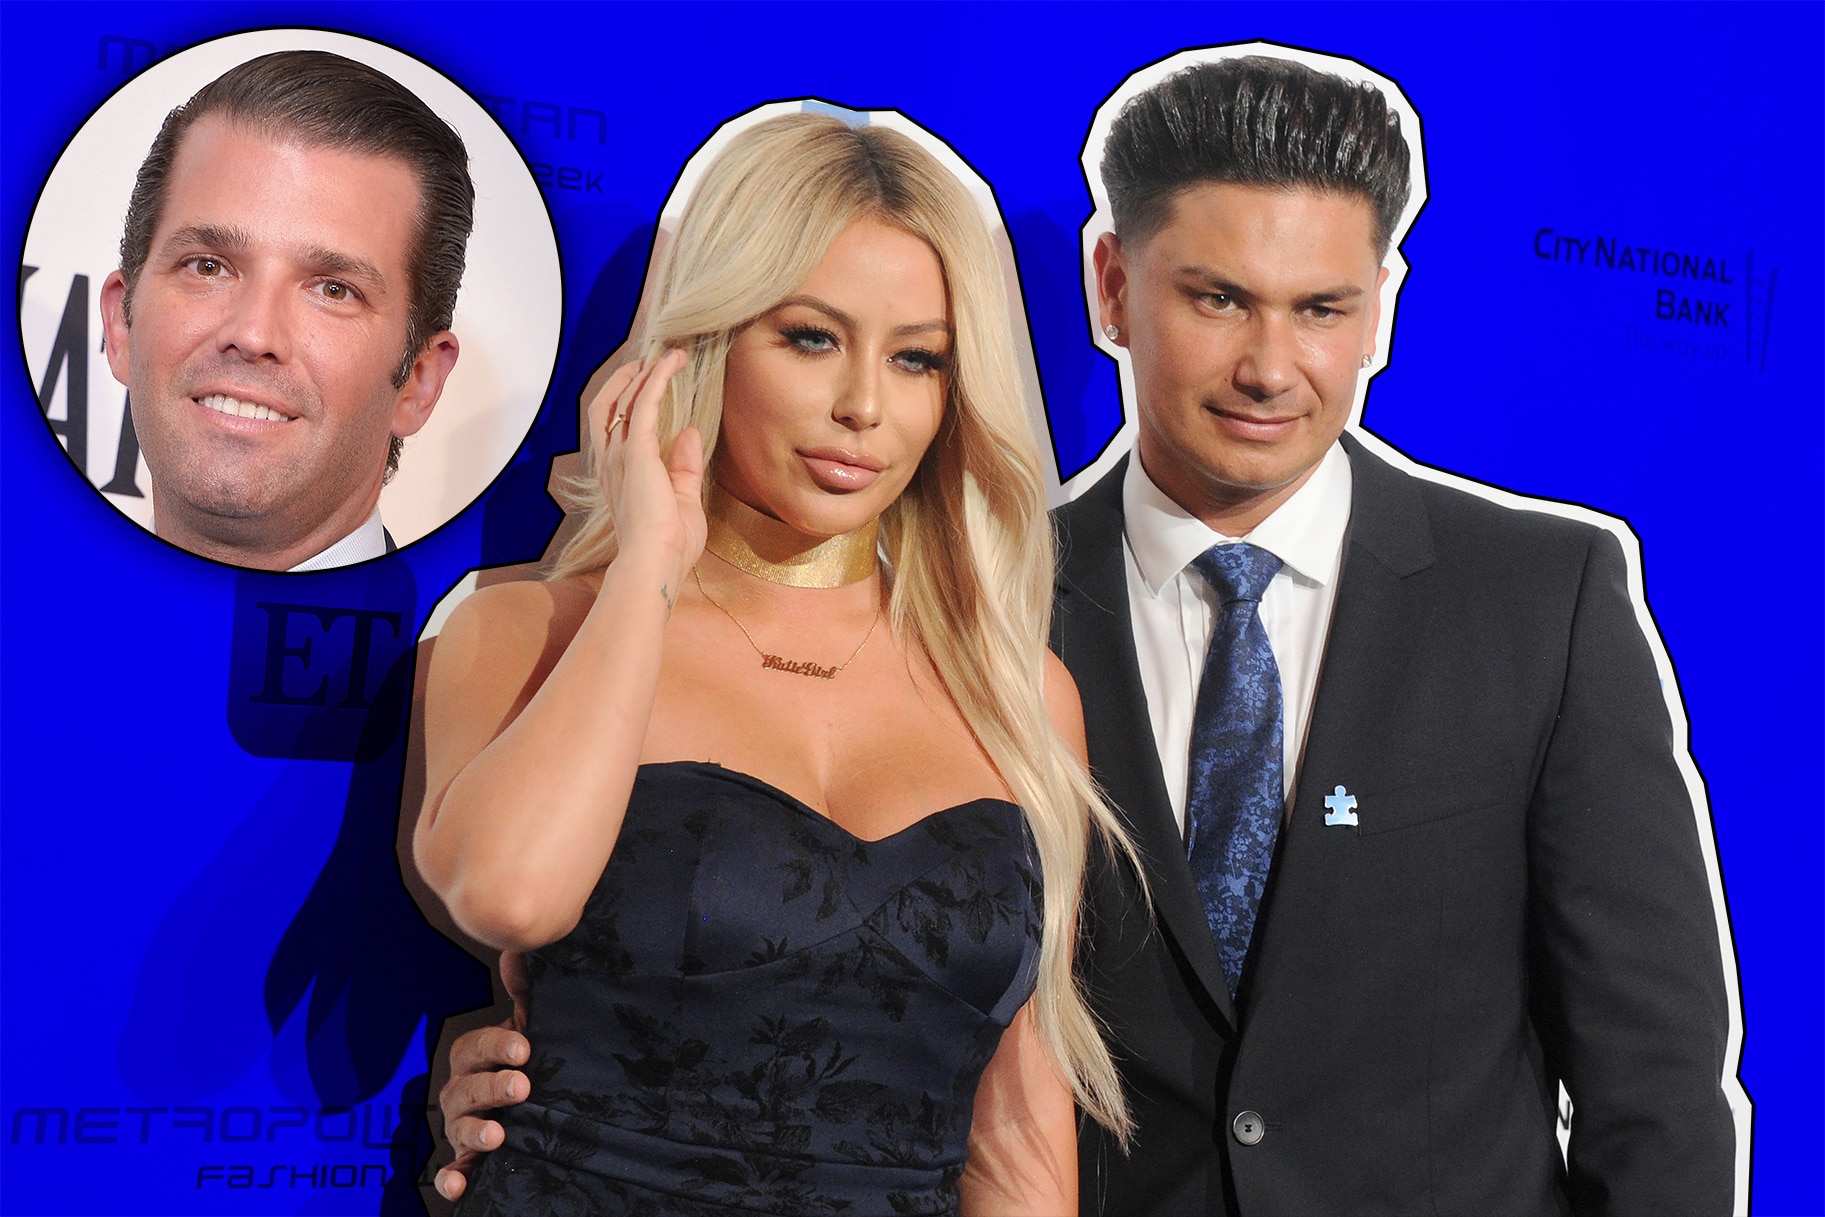 Aubrey oday is dating 2018 who